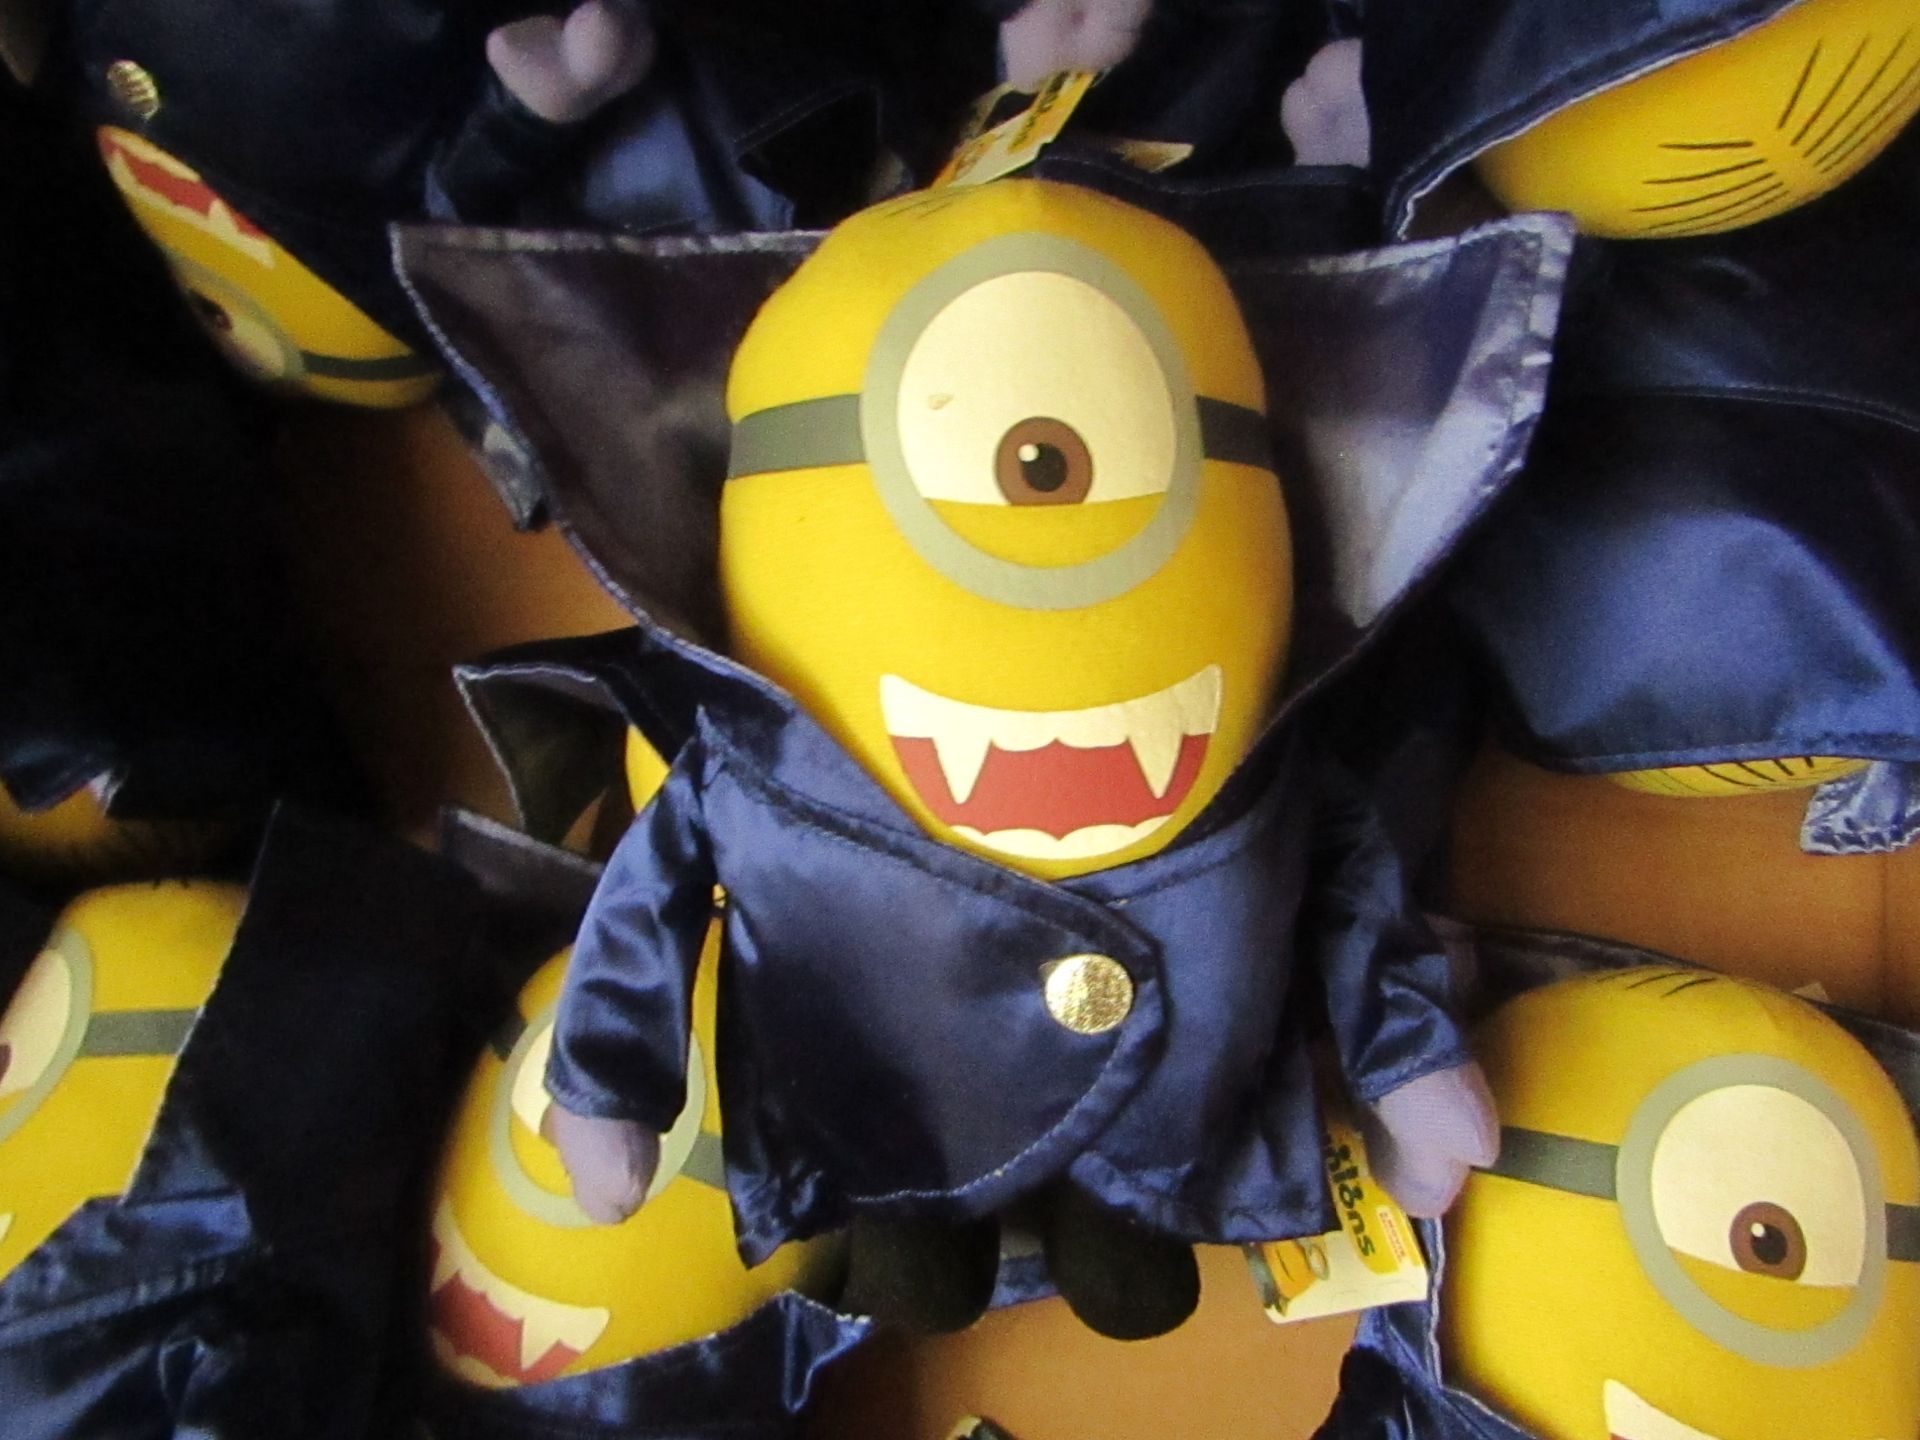 6 x Minions Teddies. New with Tags. See Image For Design